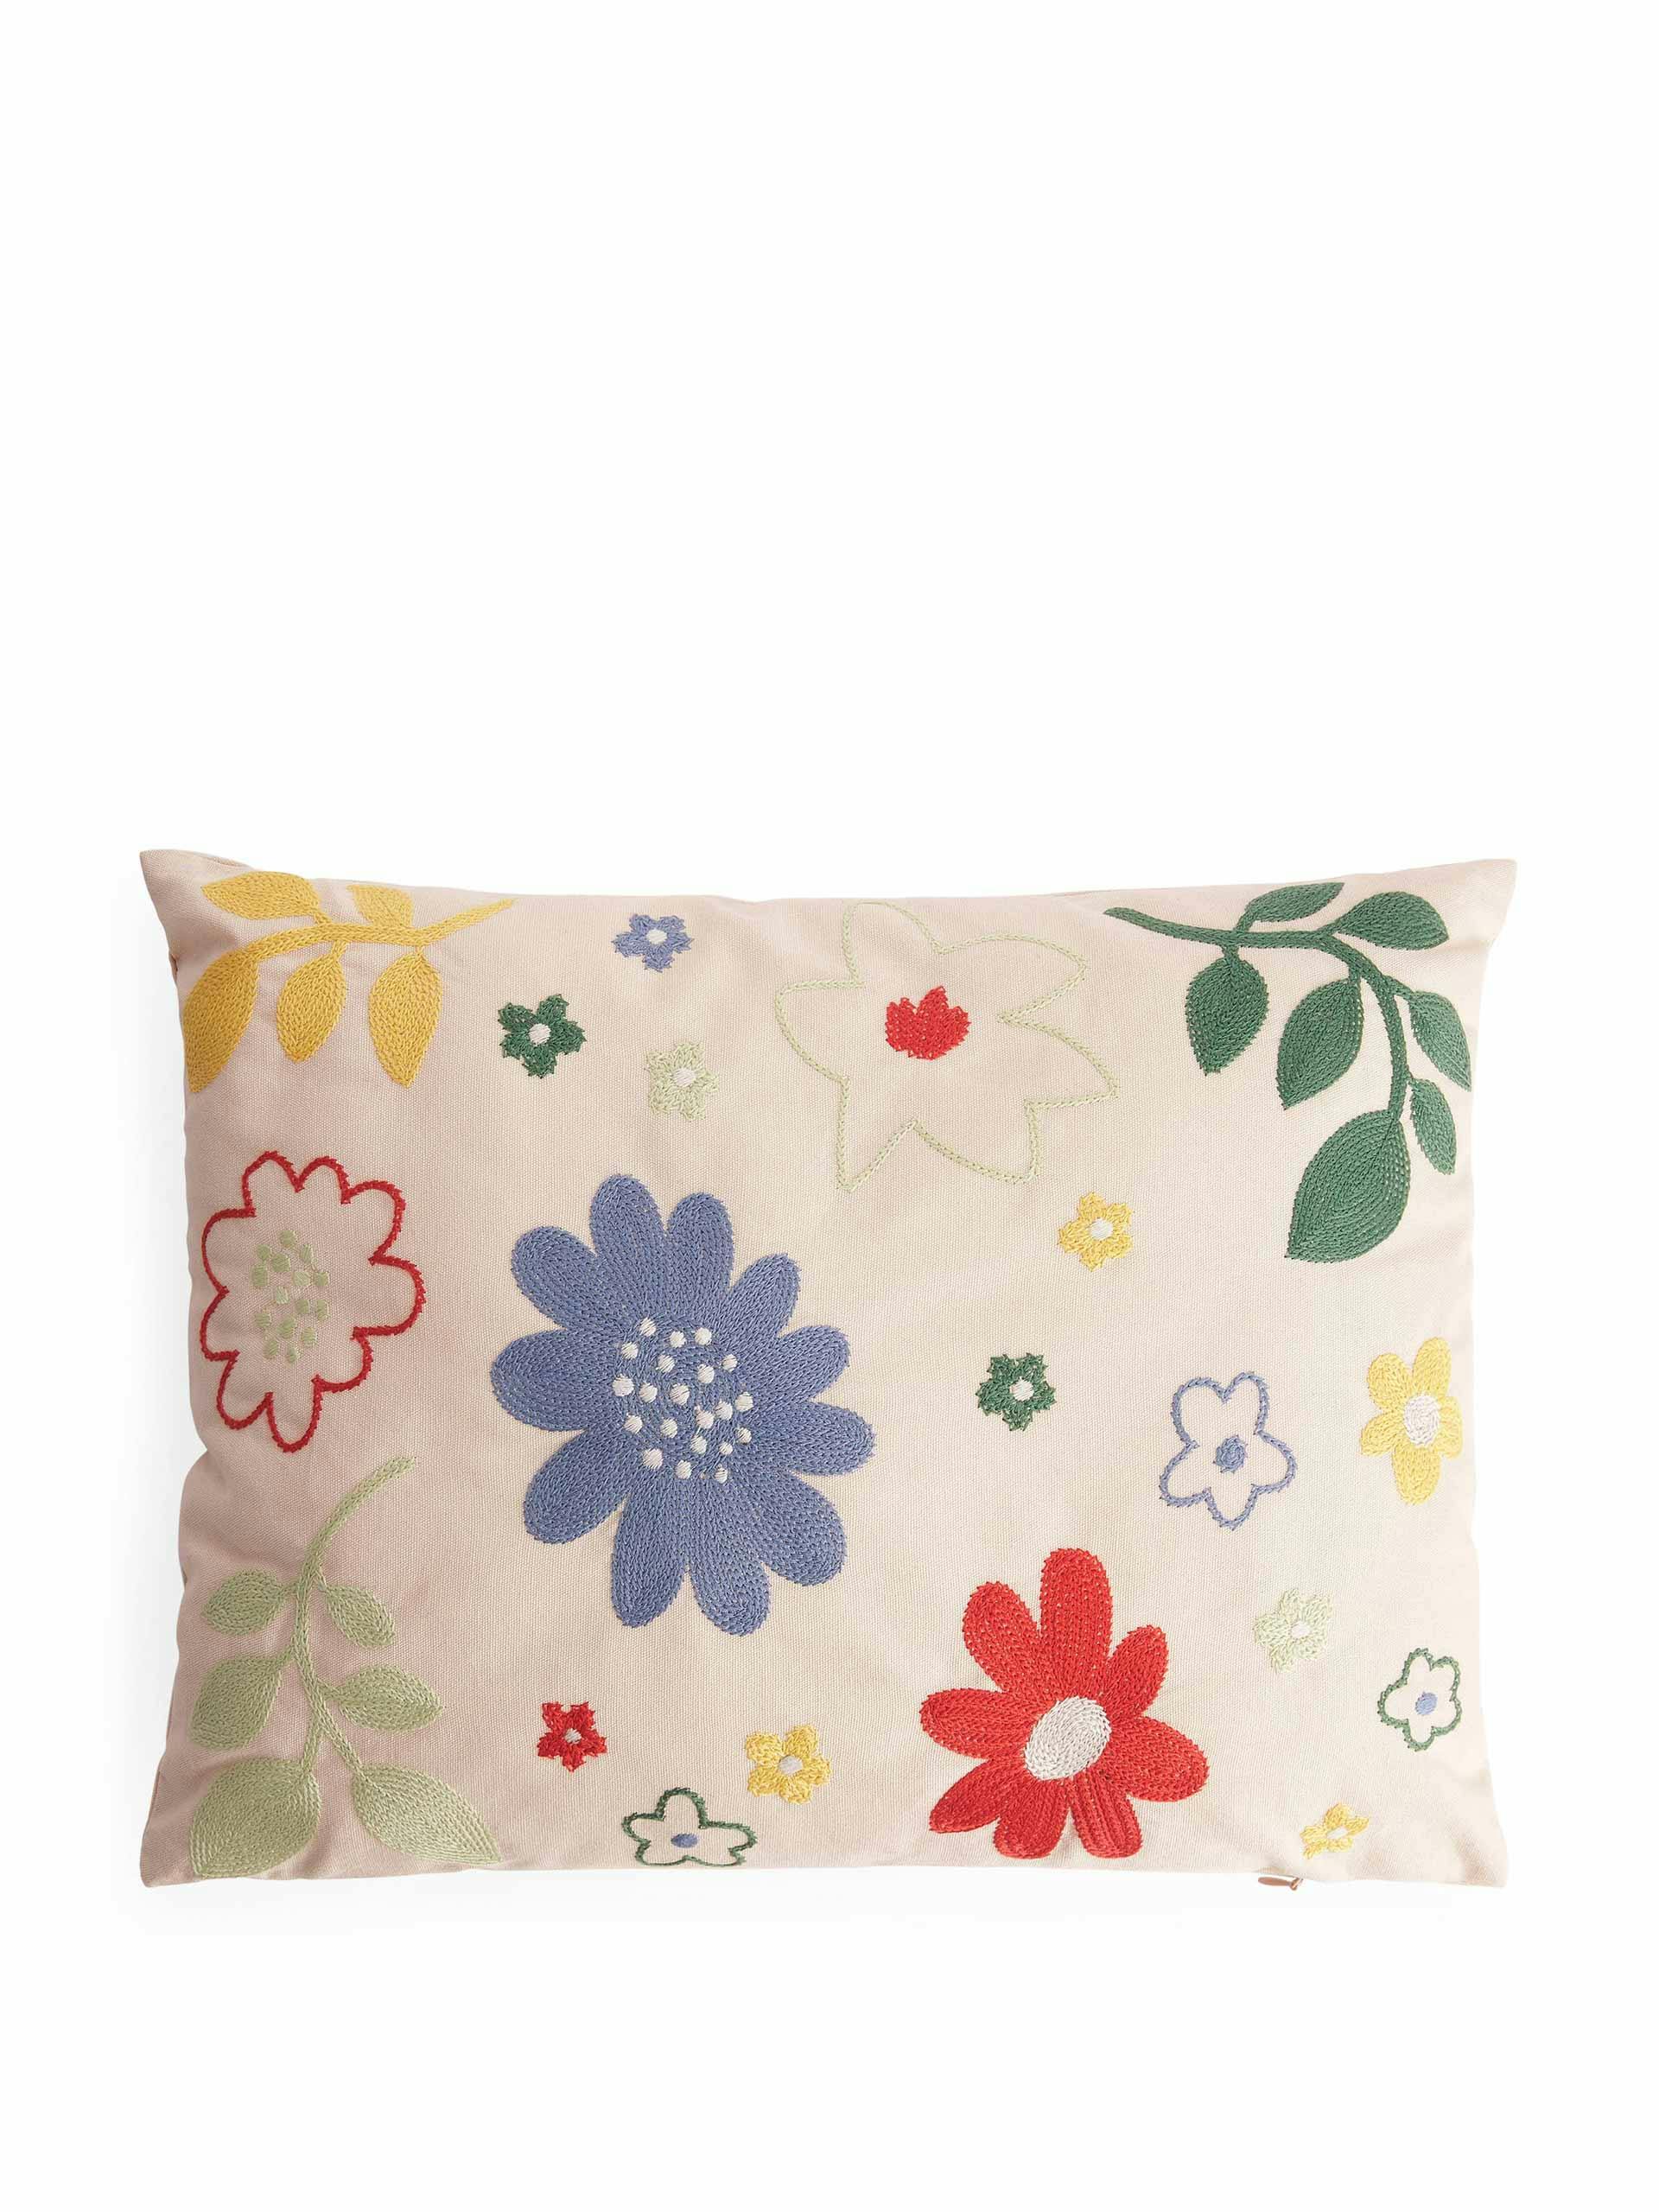 Floral embroidered cushion